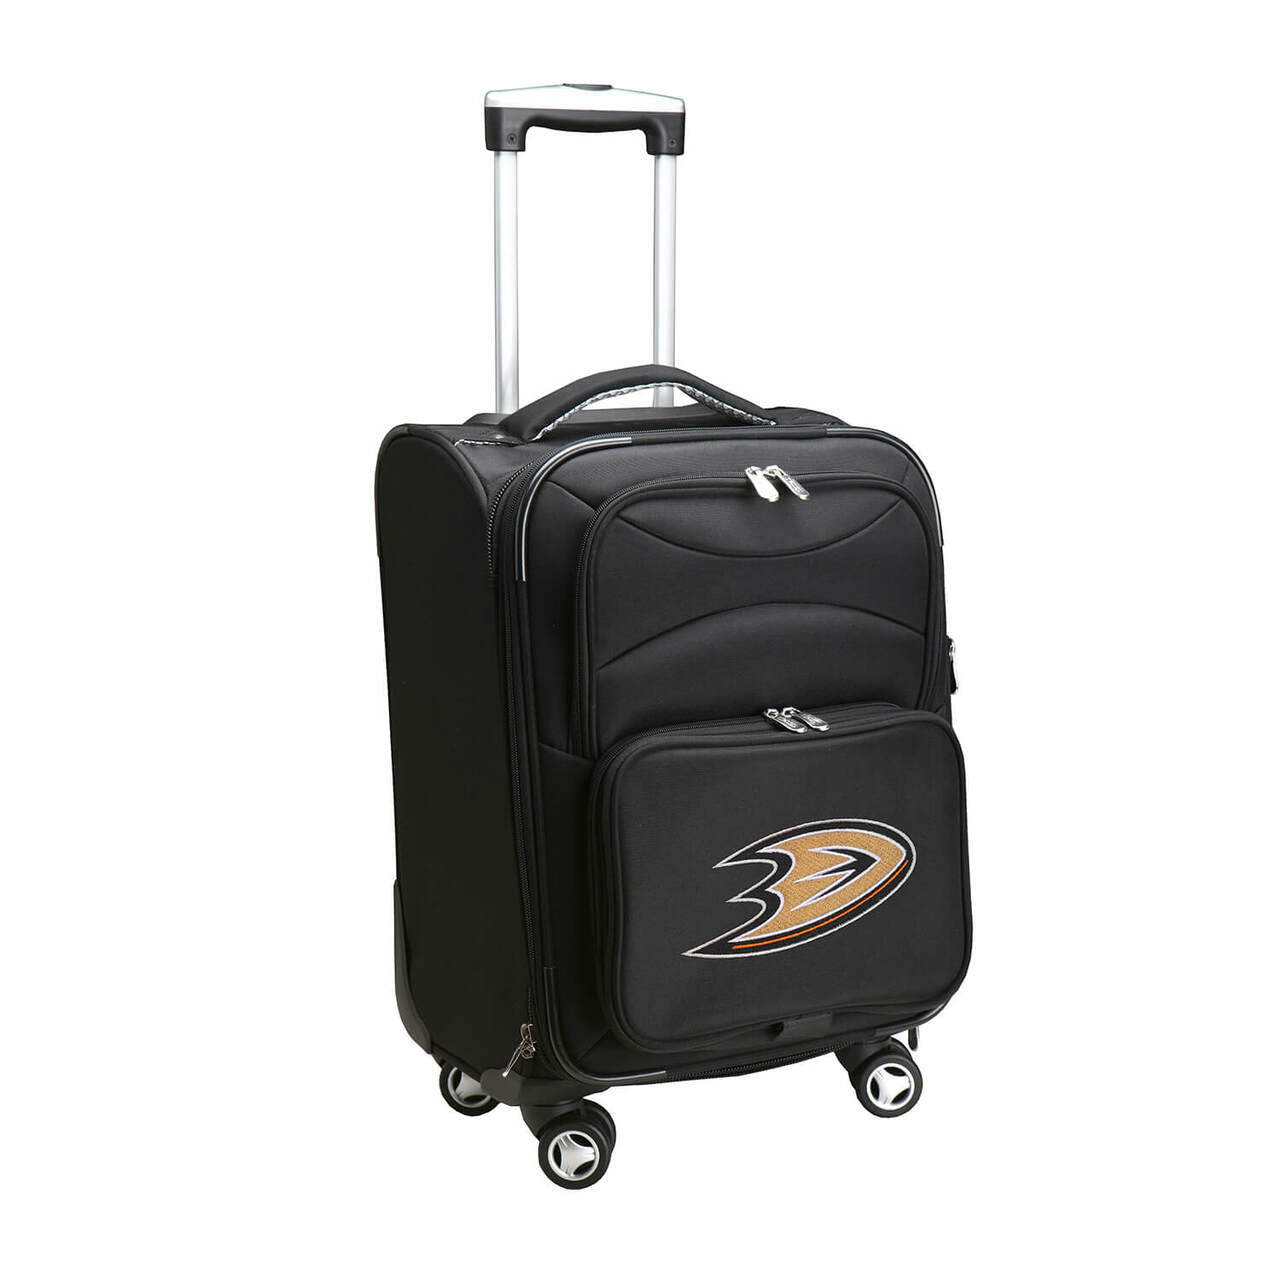 Mighty Ducks Luggage | Anaheim Mighty Ducks 21" Carry-on Spinner Luggage